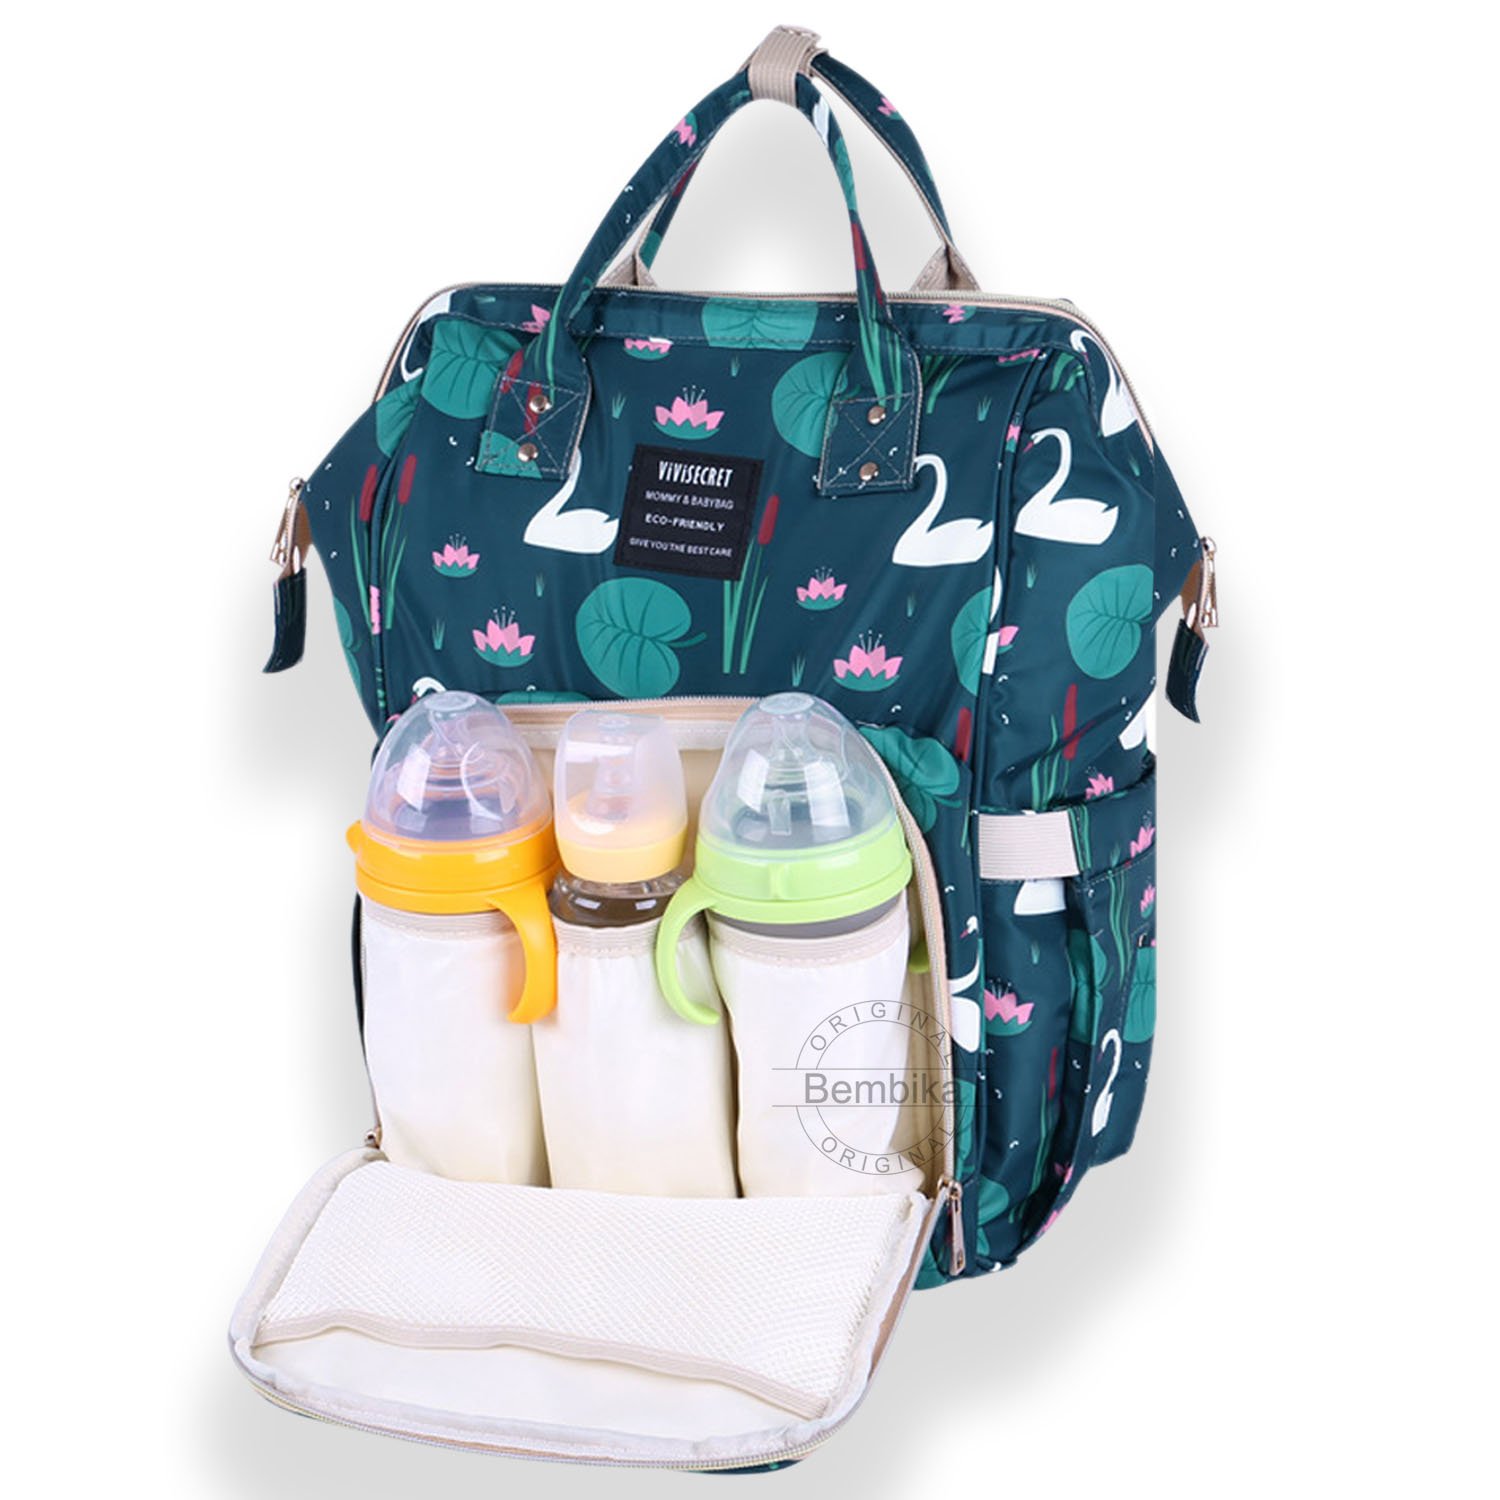 Shiaon Diaper Bag Backpack with Changing Station, Foldable India | Ubuy